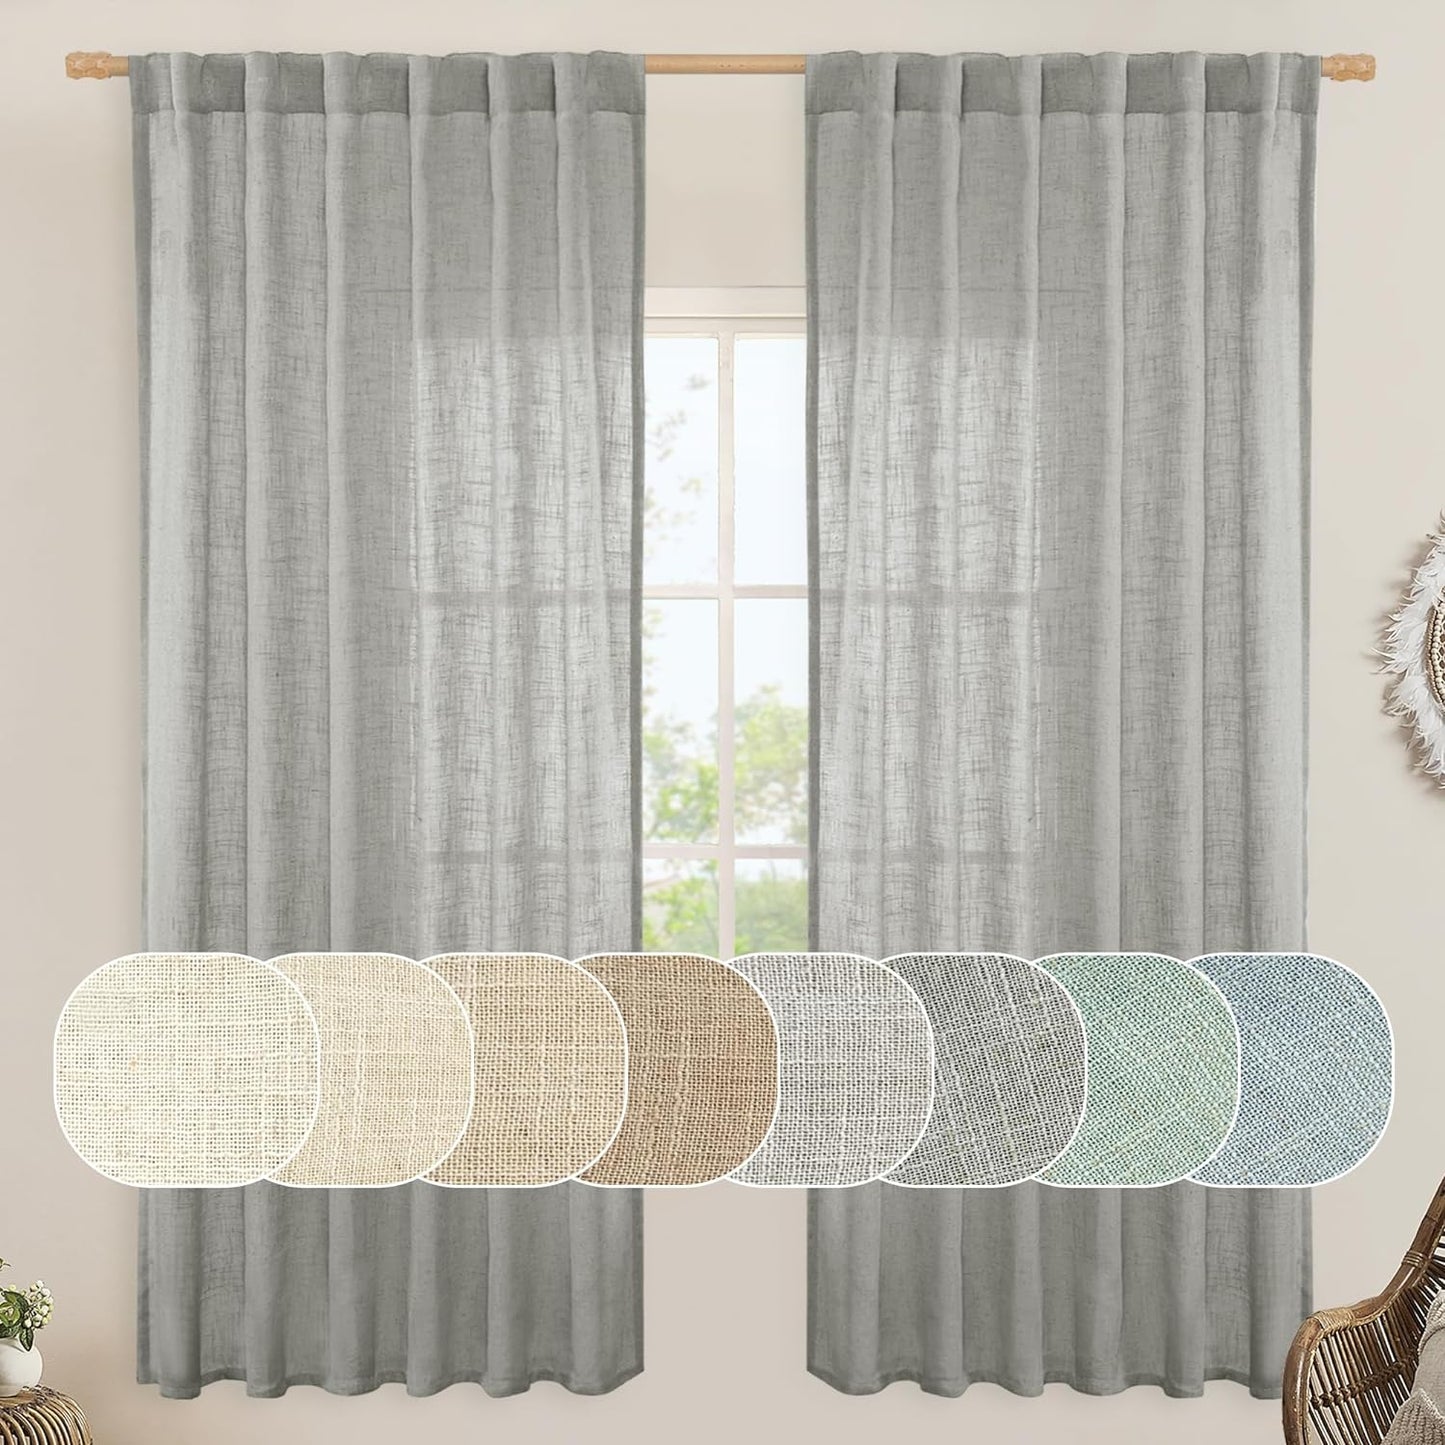 LAMIT Natural Linen Blended Curtains for Living Room, Back Tab and Rod Pocket Semi Sheer Curtains Light Filtering Country Rustic Drapes for Bedroom/Farmhouse, 2 Panels,52 X 108 Inch, Linen  LAMIT Grey 52W X 72L 